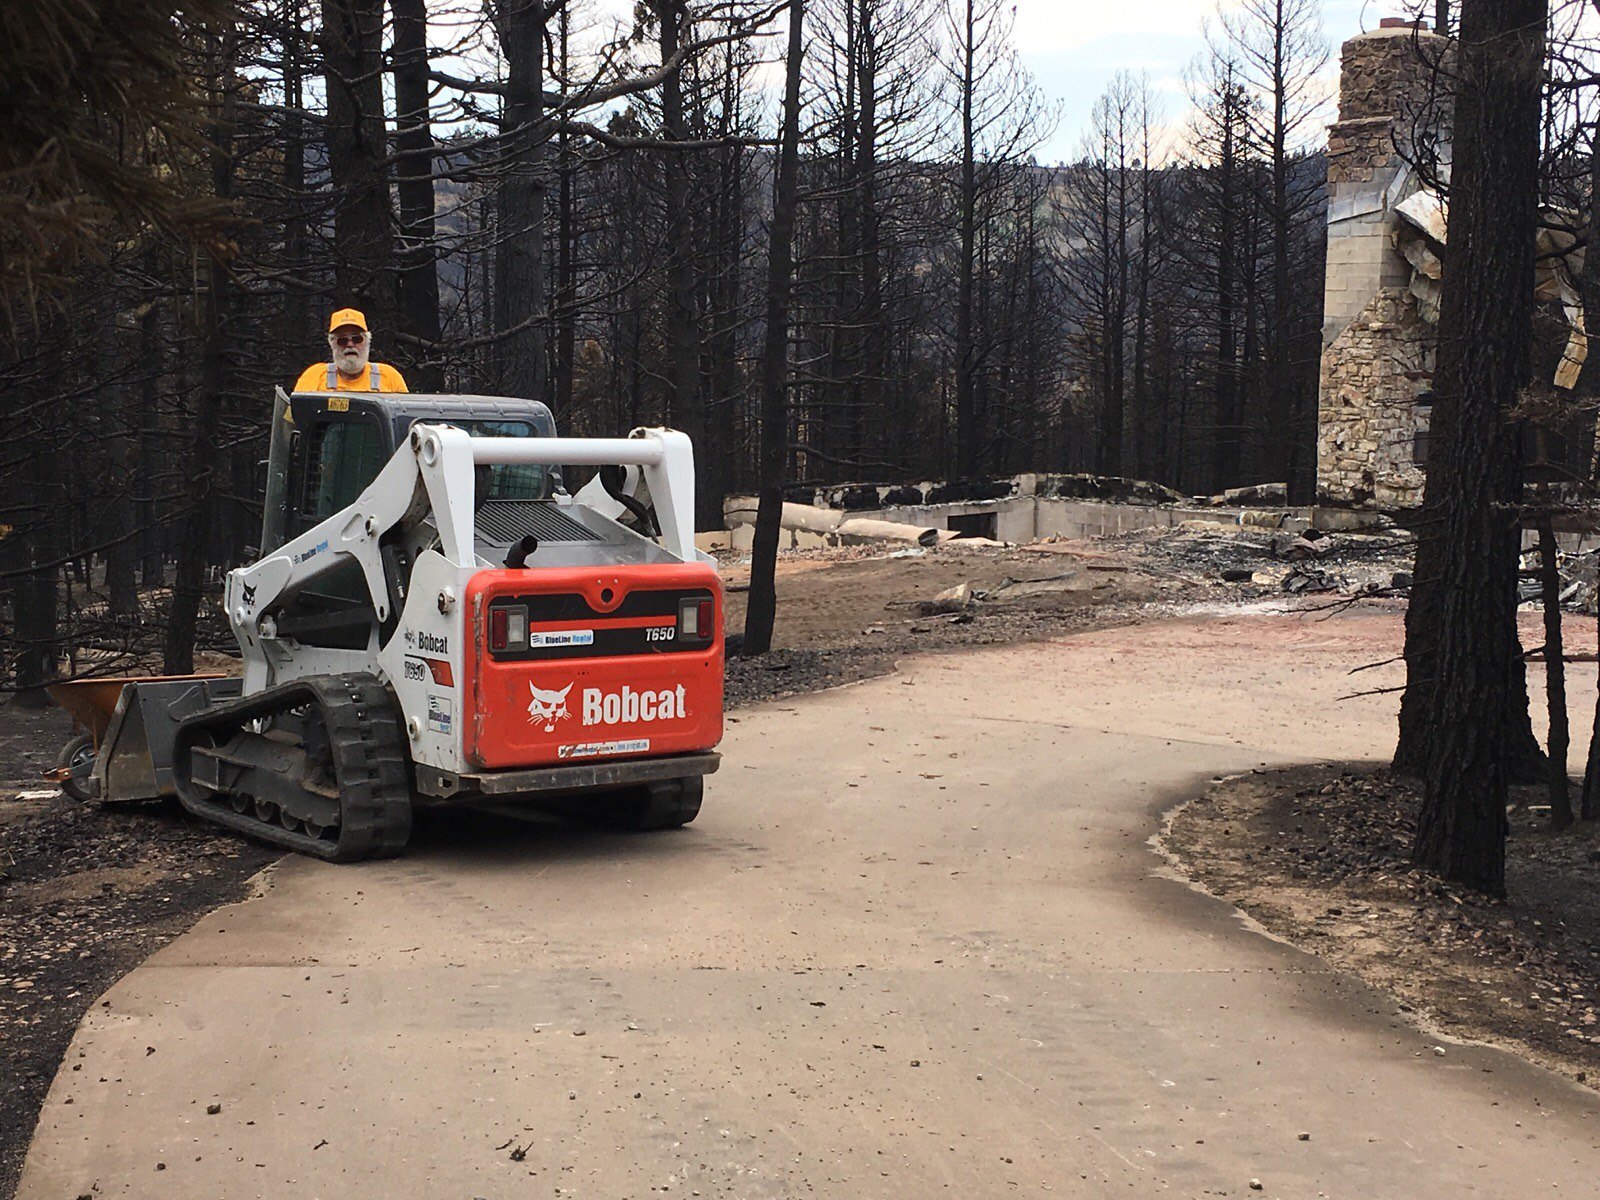 Southern Baptists respond to Colorado forest fires